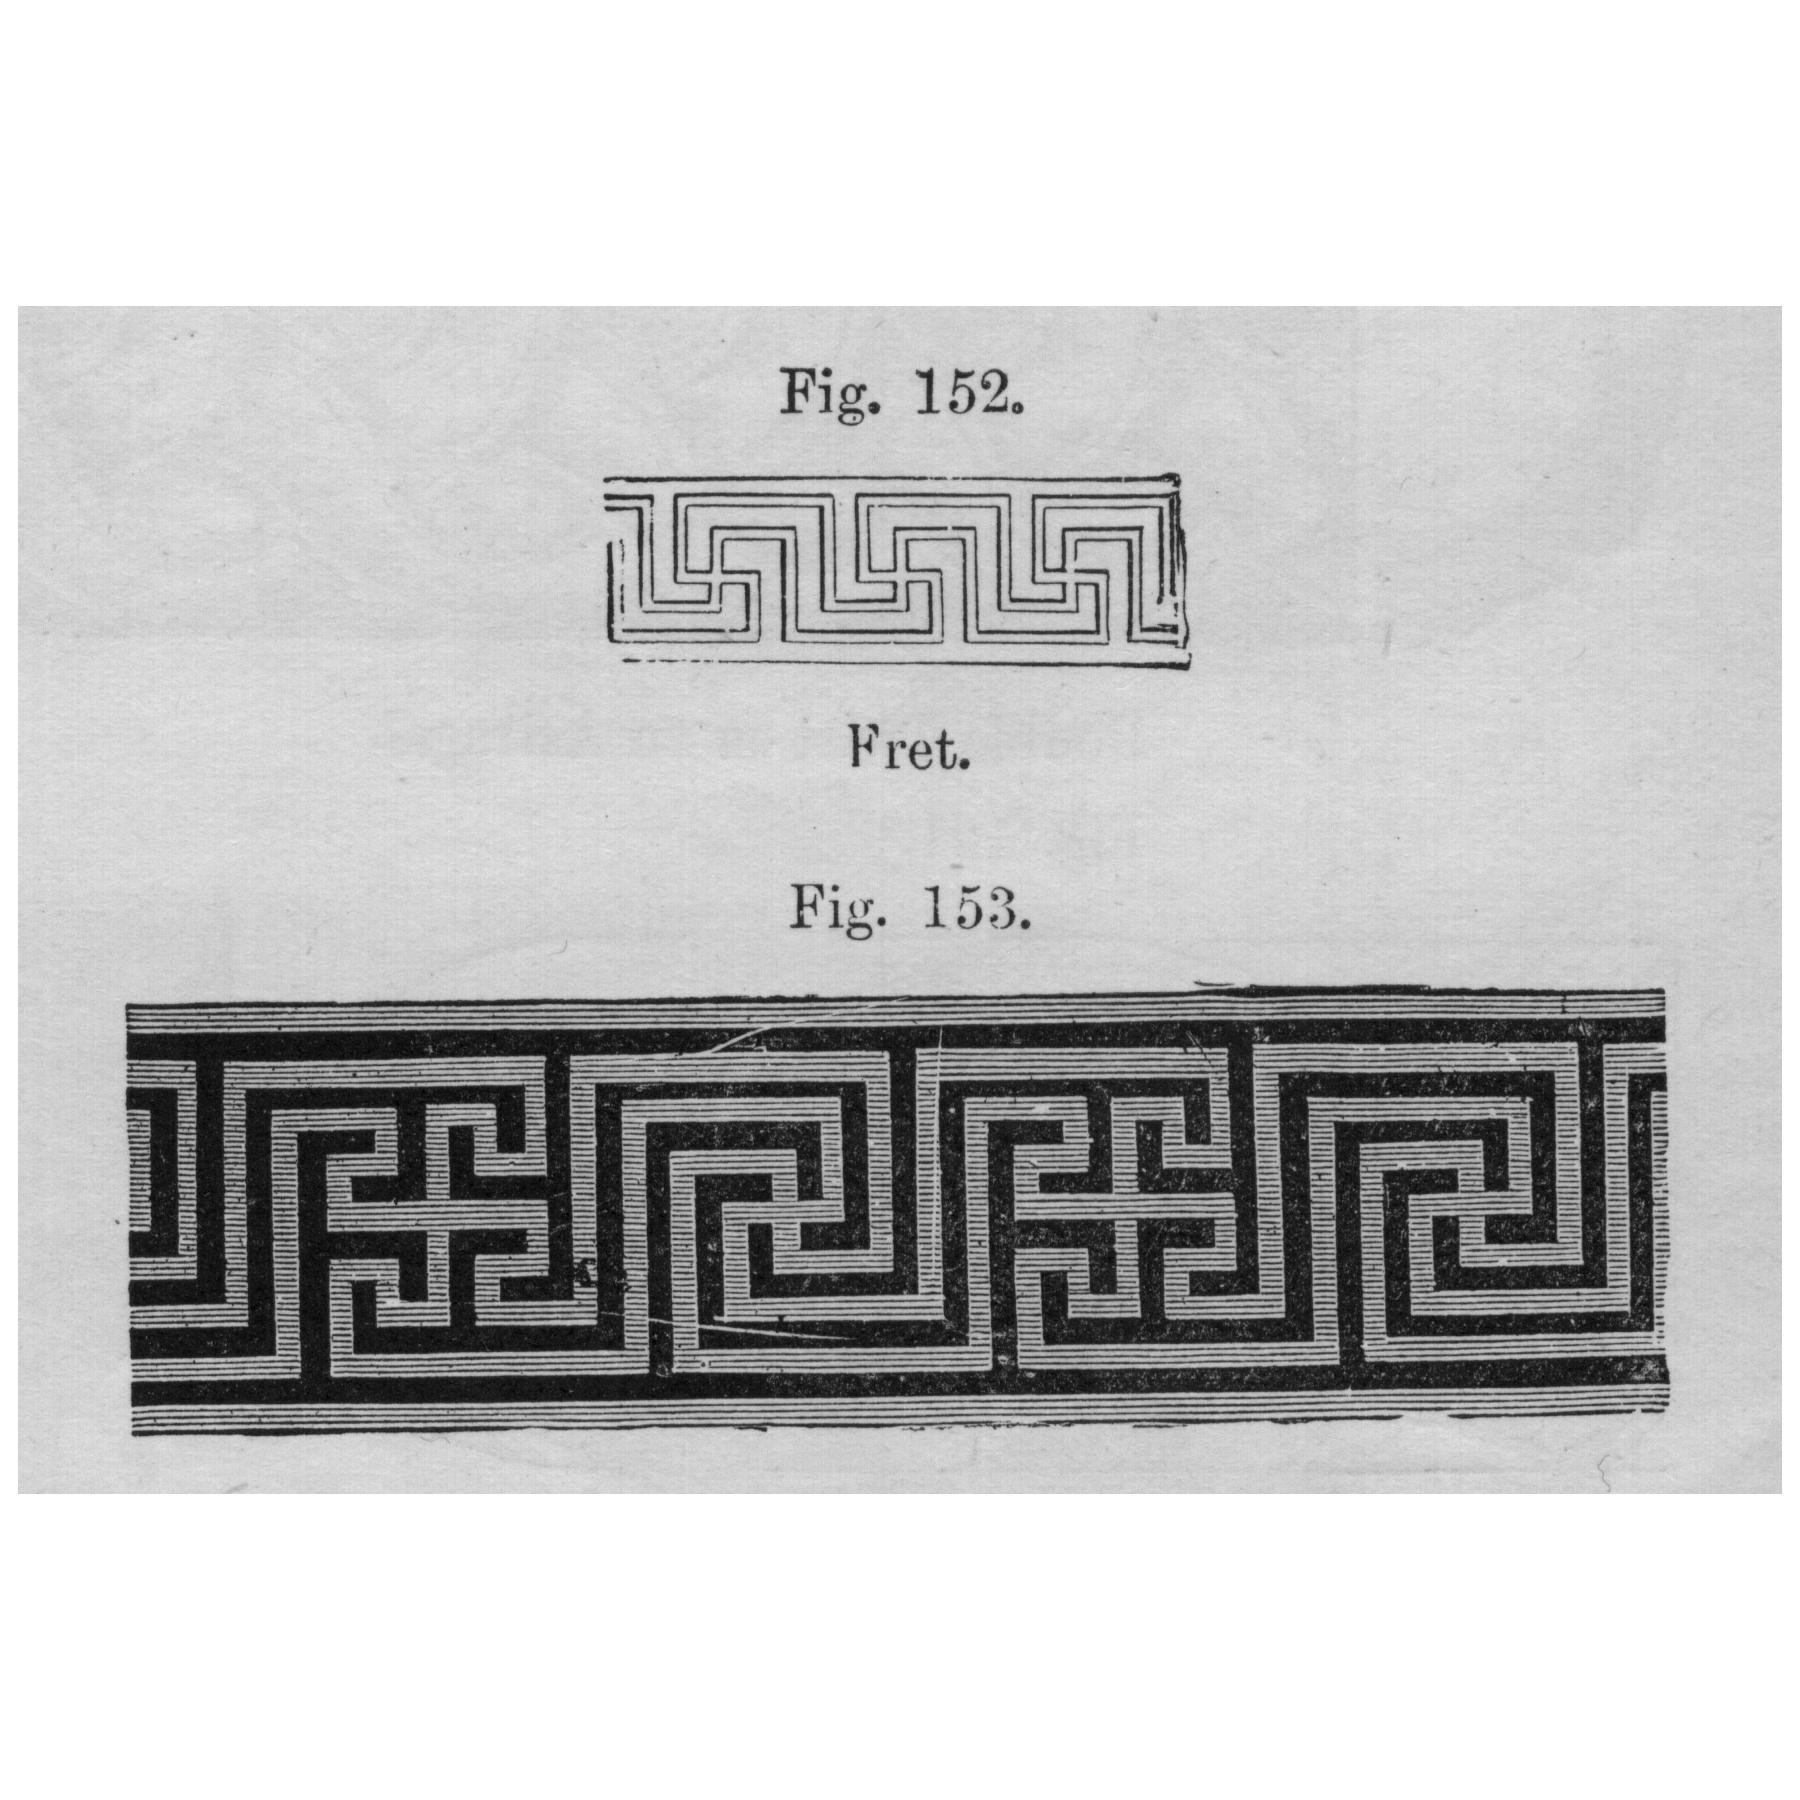 An architectural rendering of a Greek fret, also called a meander, is a decorative border created from one continuous line forming a repetitive pattern.